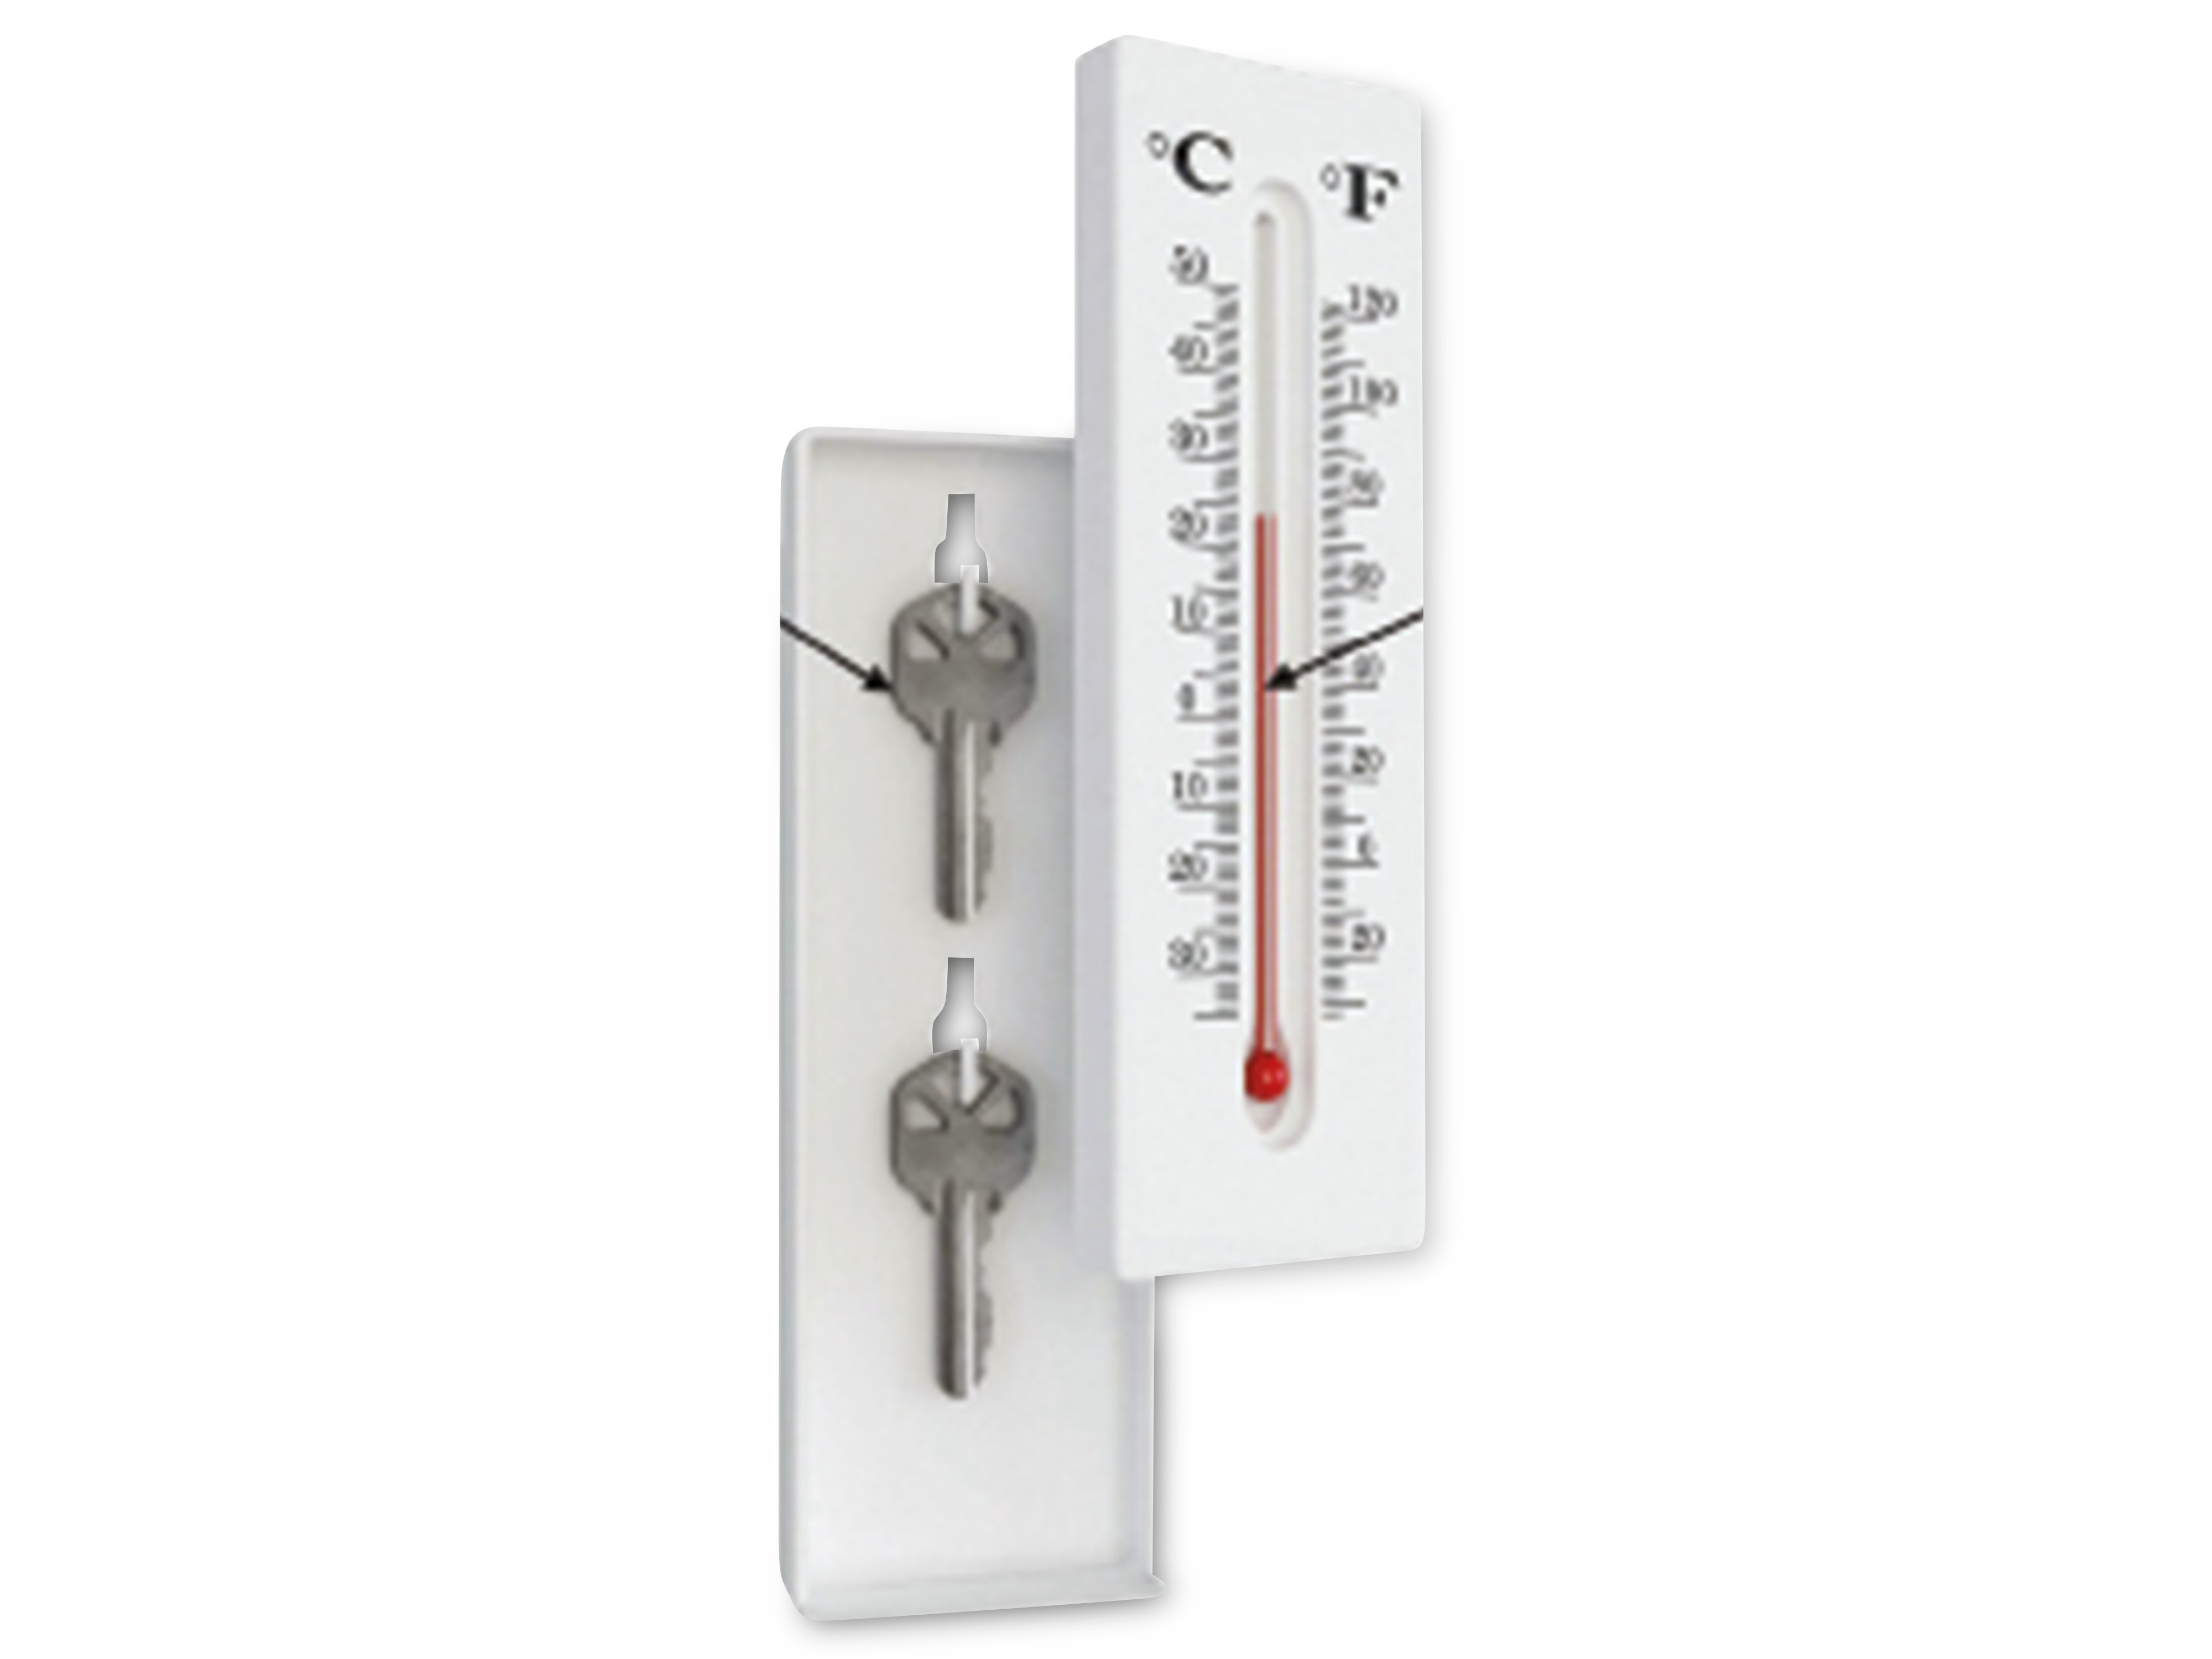 KH-SECURITY Hidden Safe – Thermometer